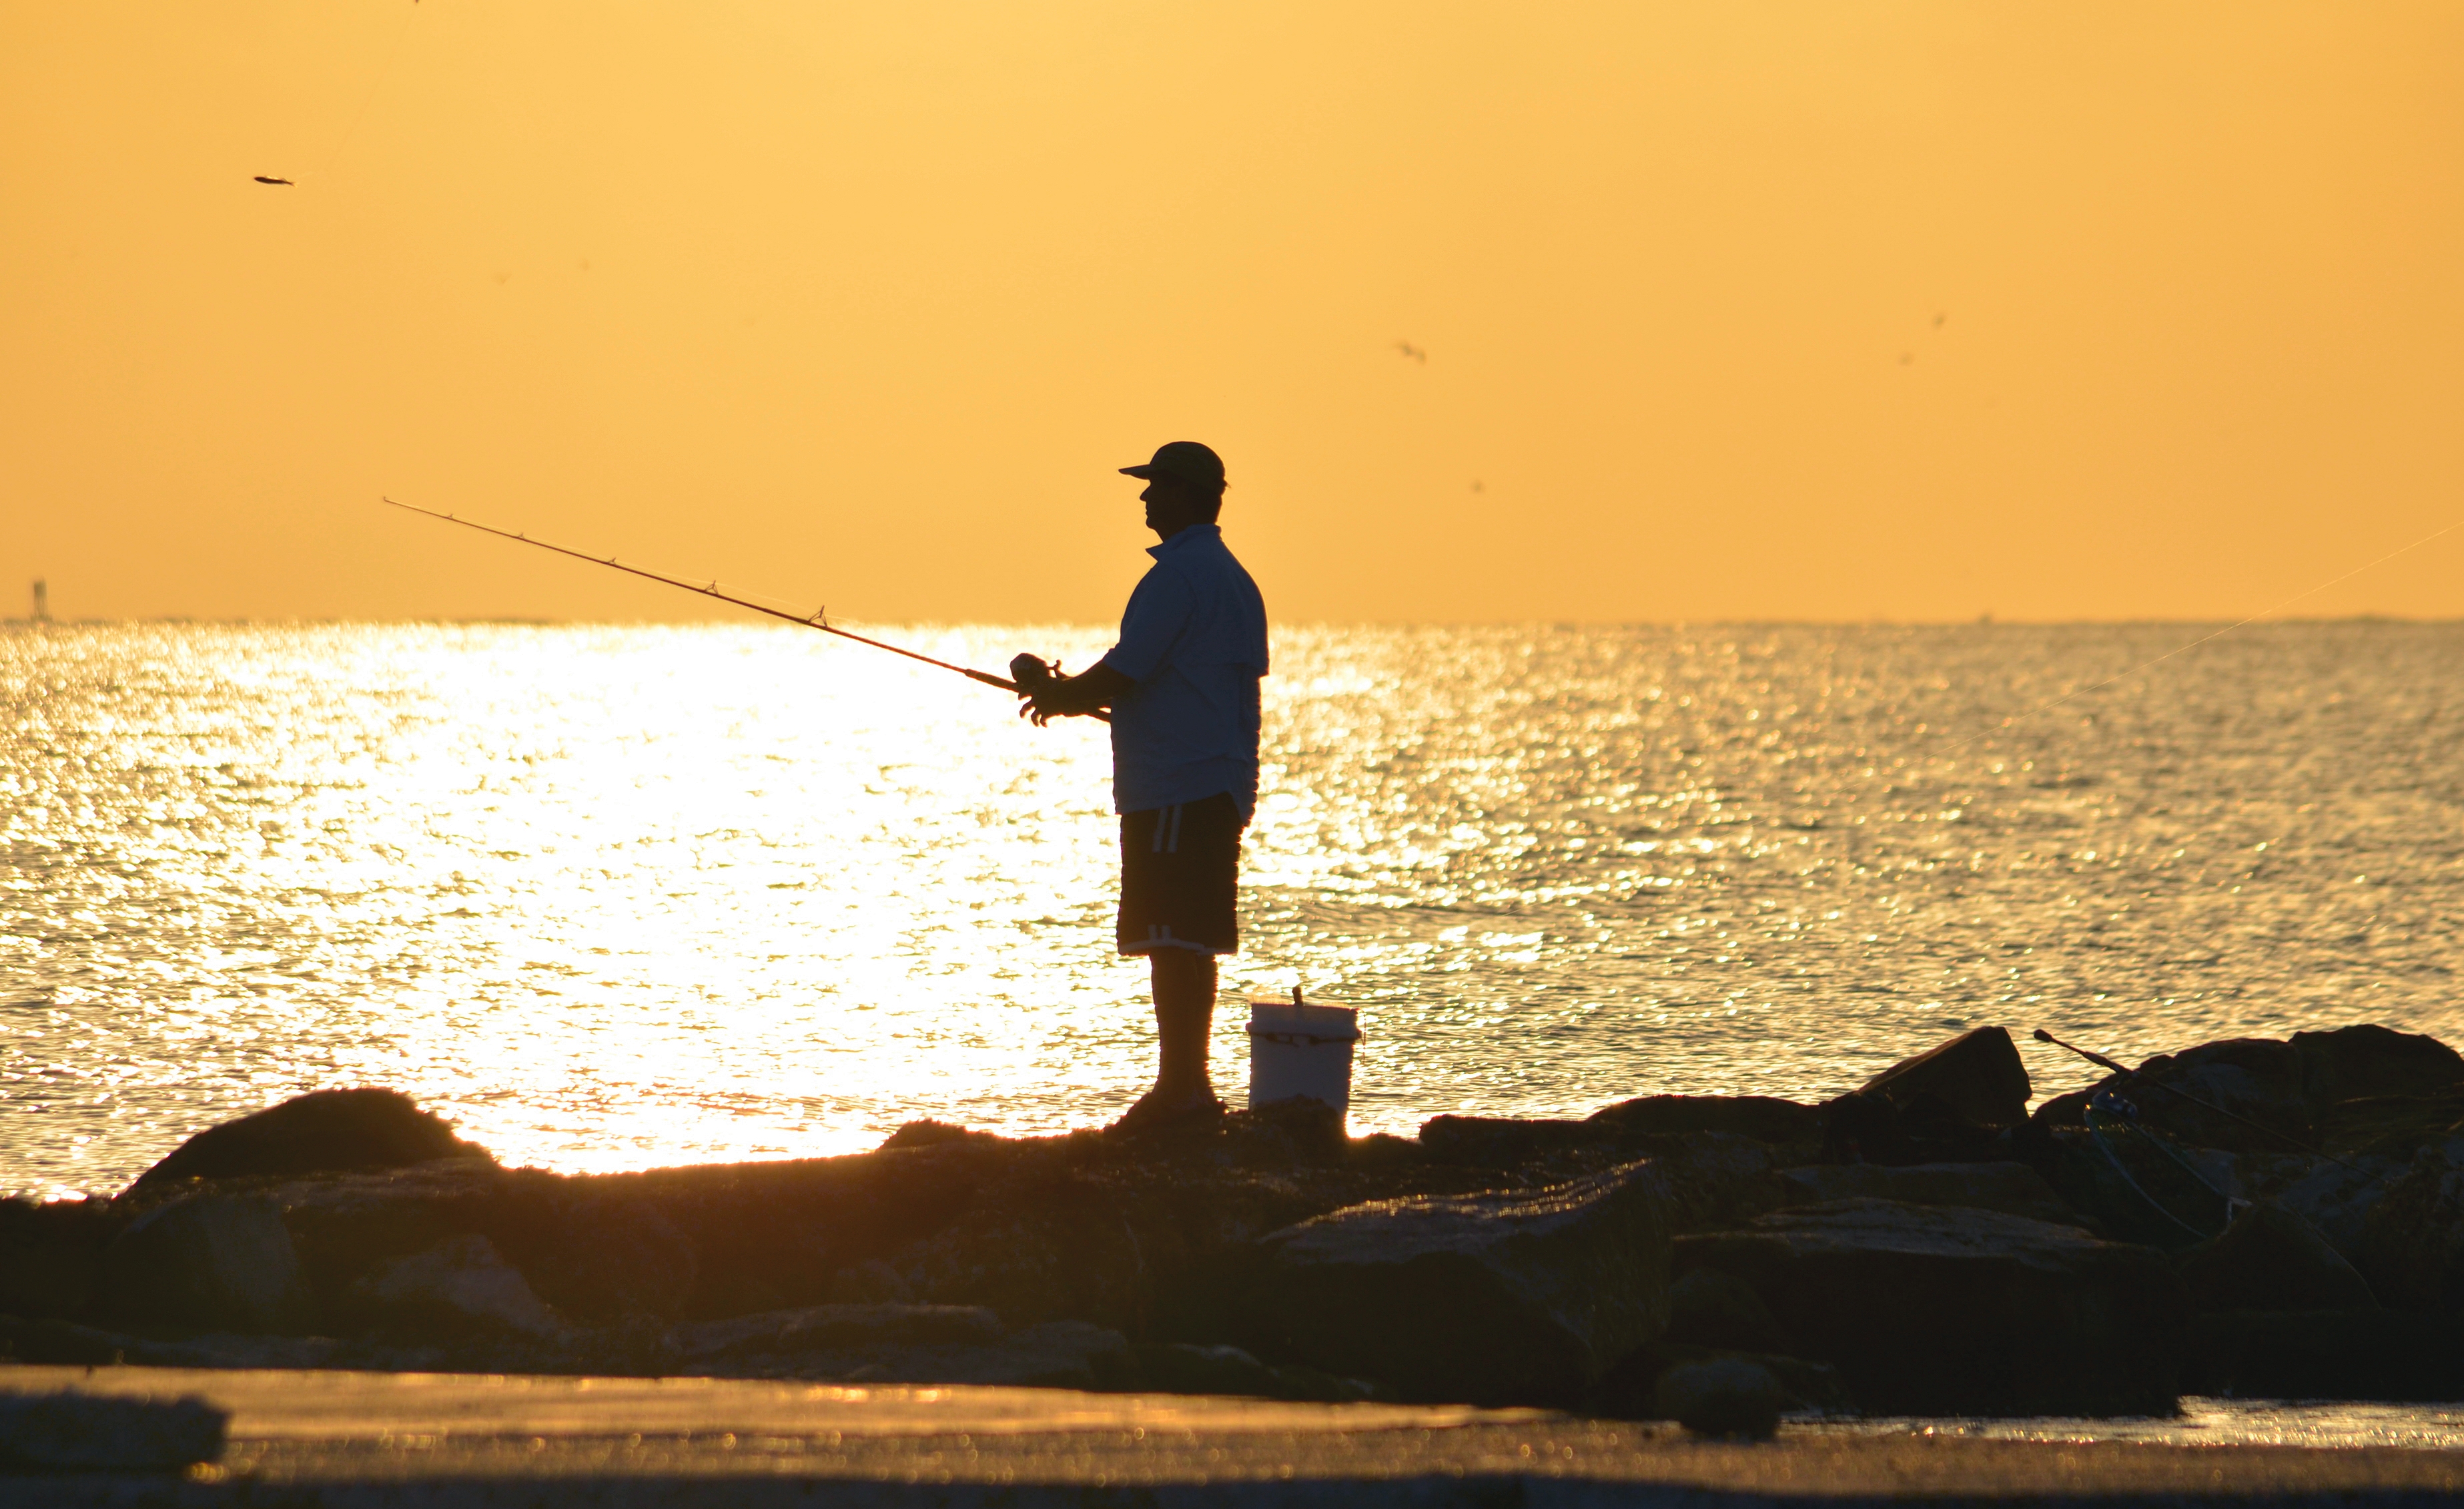 Offshore Fishing in Texas  Shorelines, Bays, Piers, & Lakes